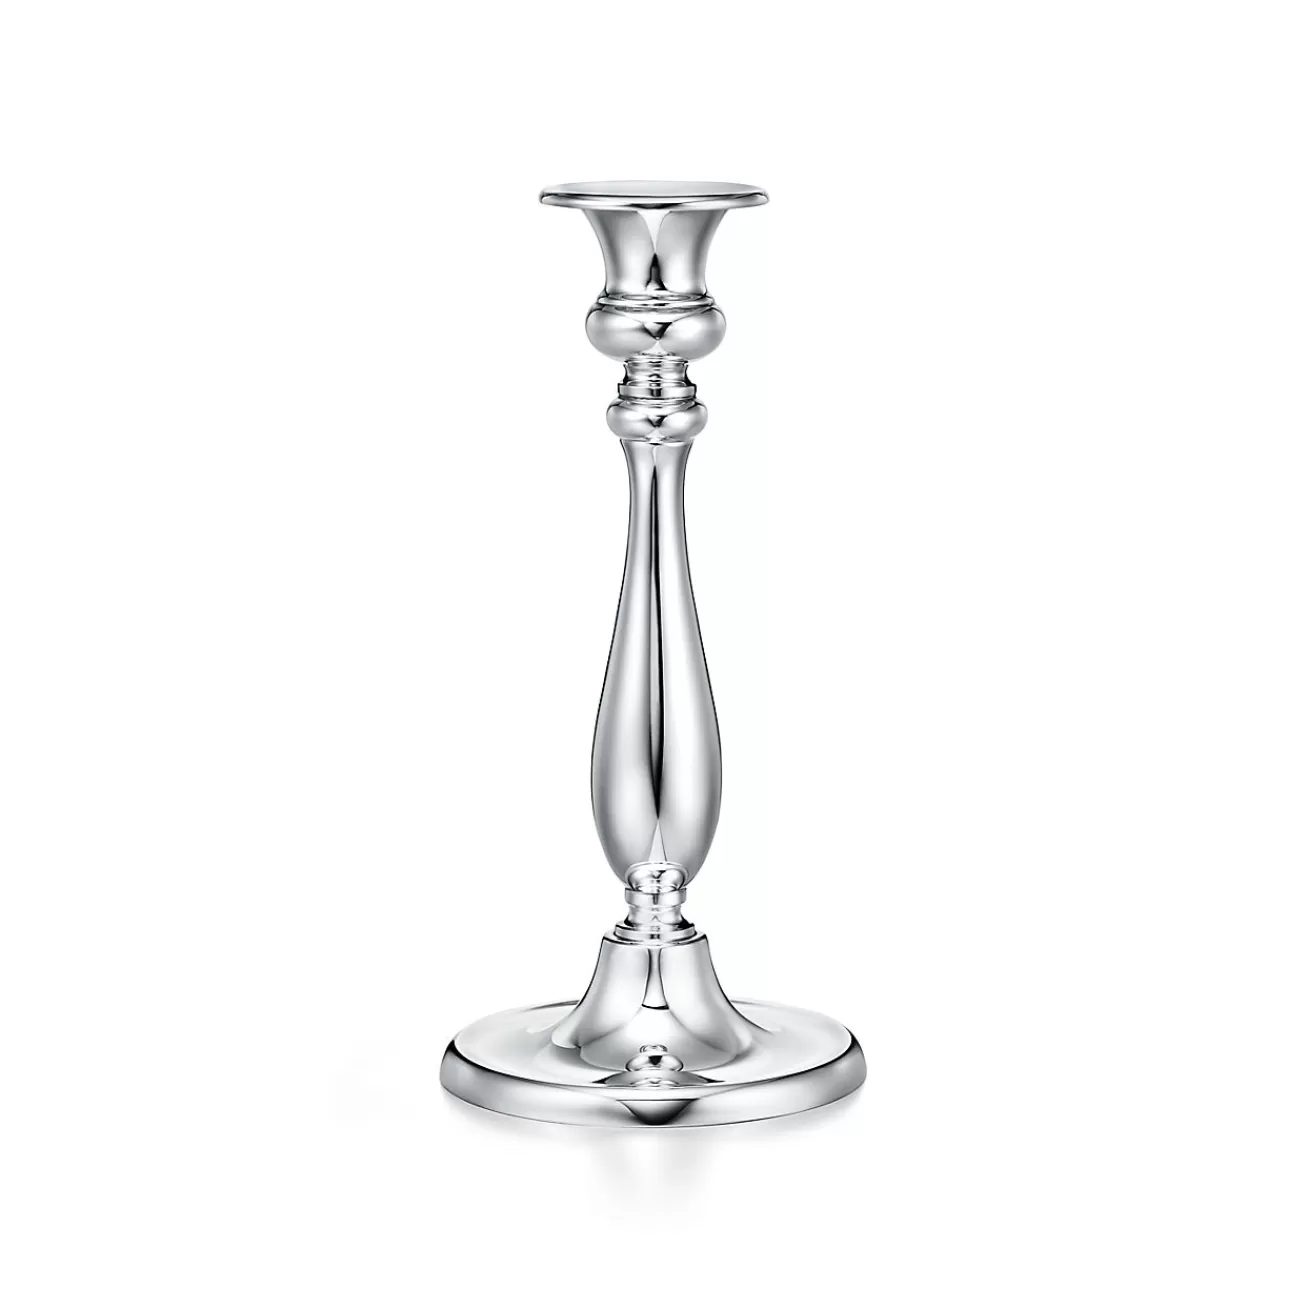 Tiffany & Co. Candlestick in sterling silver. | ^ The Couple | Wedding Gifts